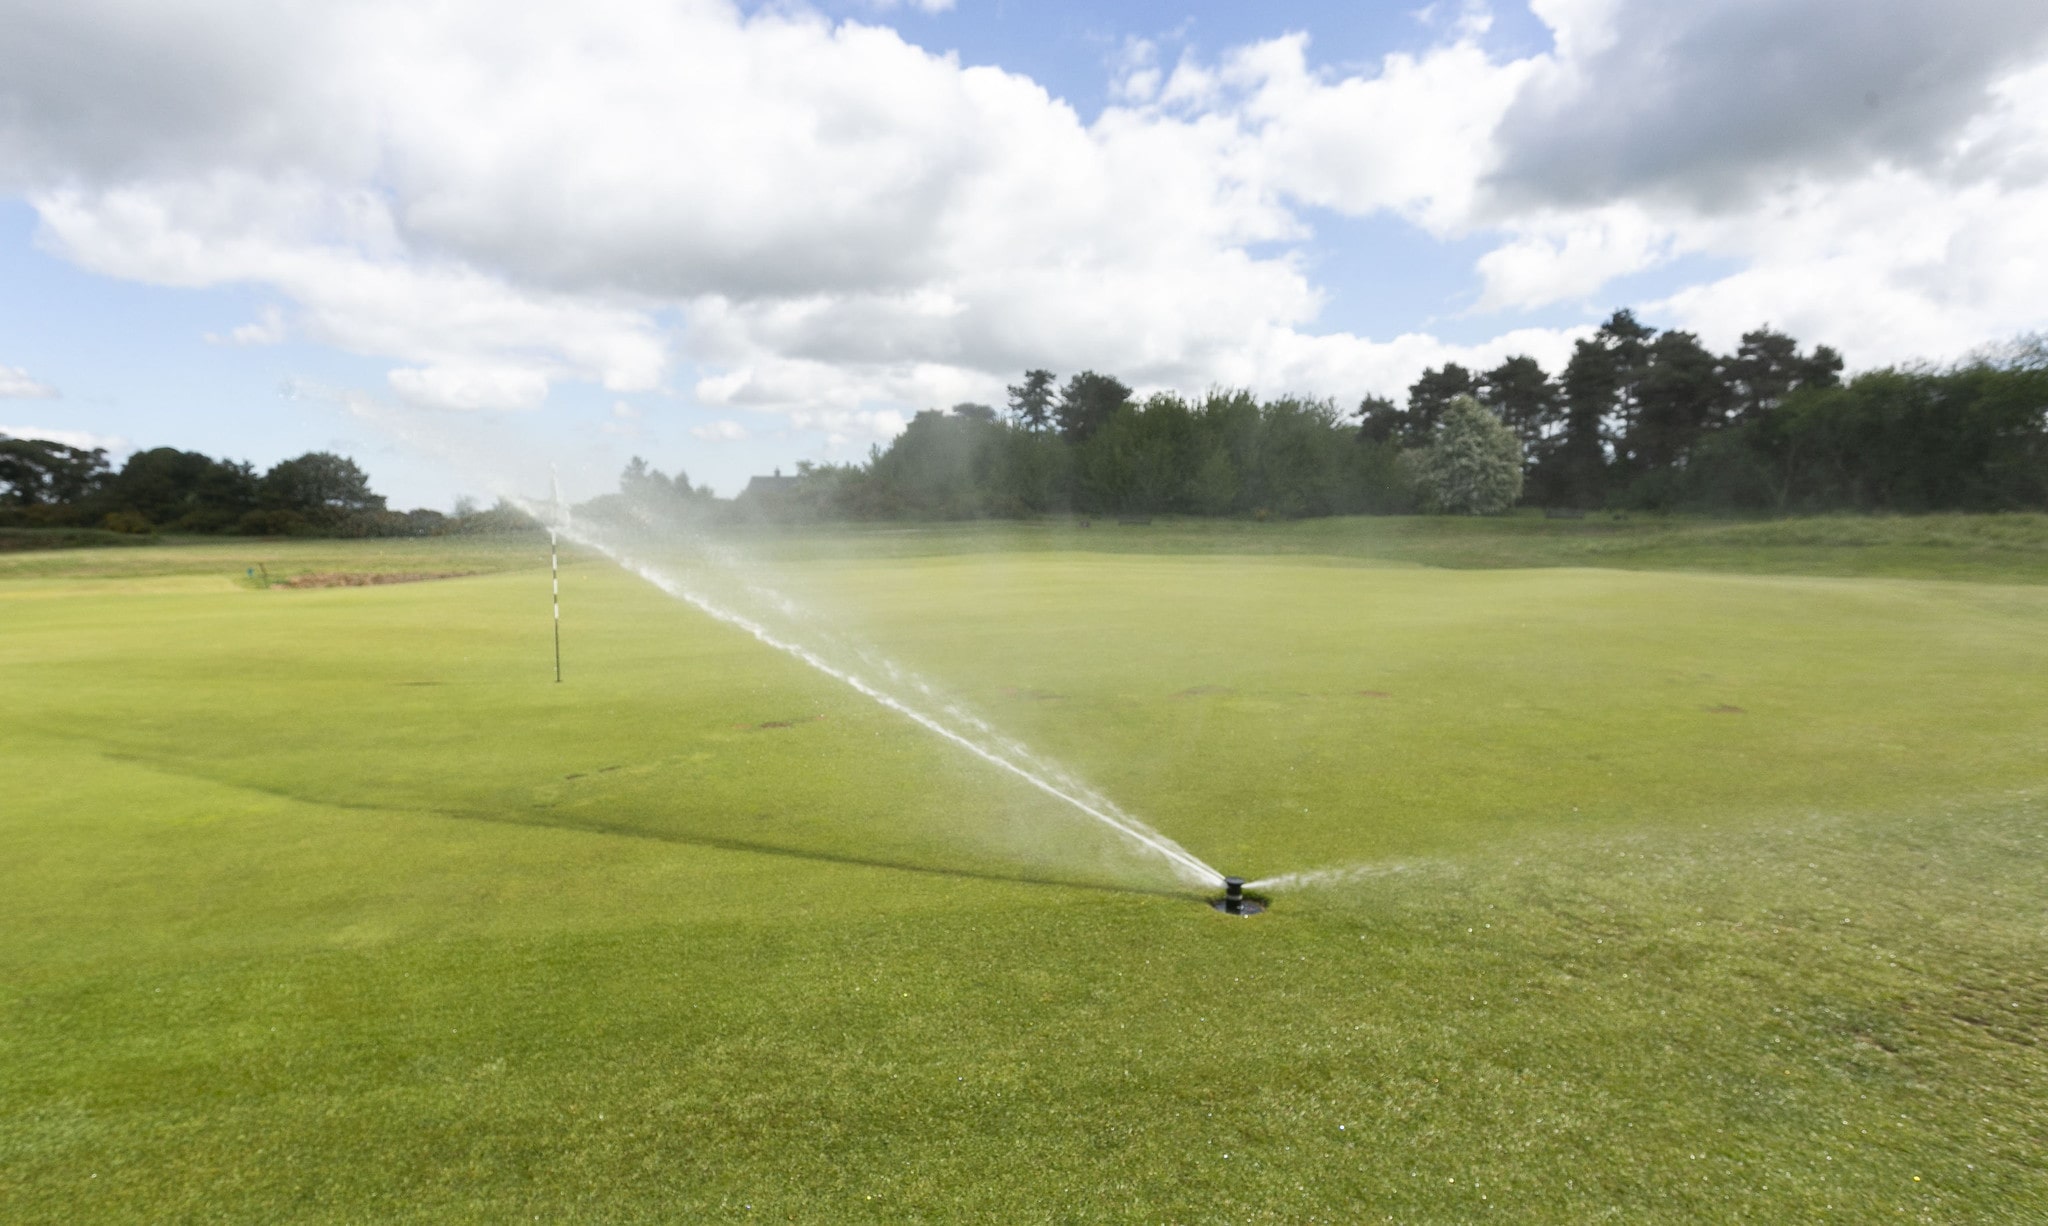 A Toro Irrigation sprinkler head operating, spraying water over a golf course green.